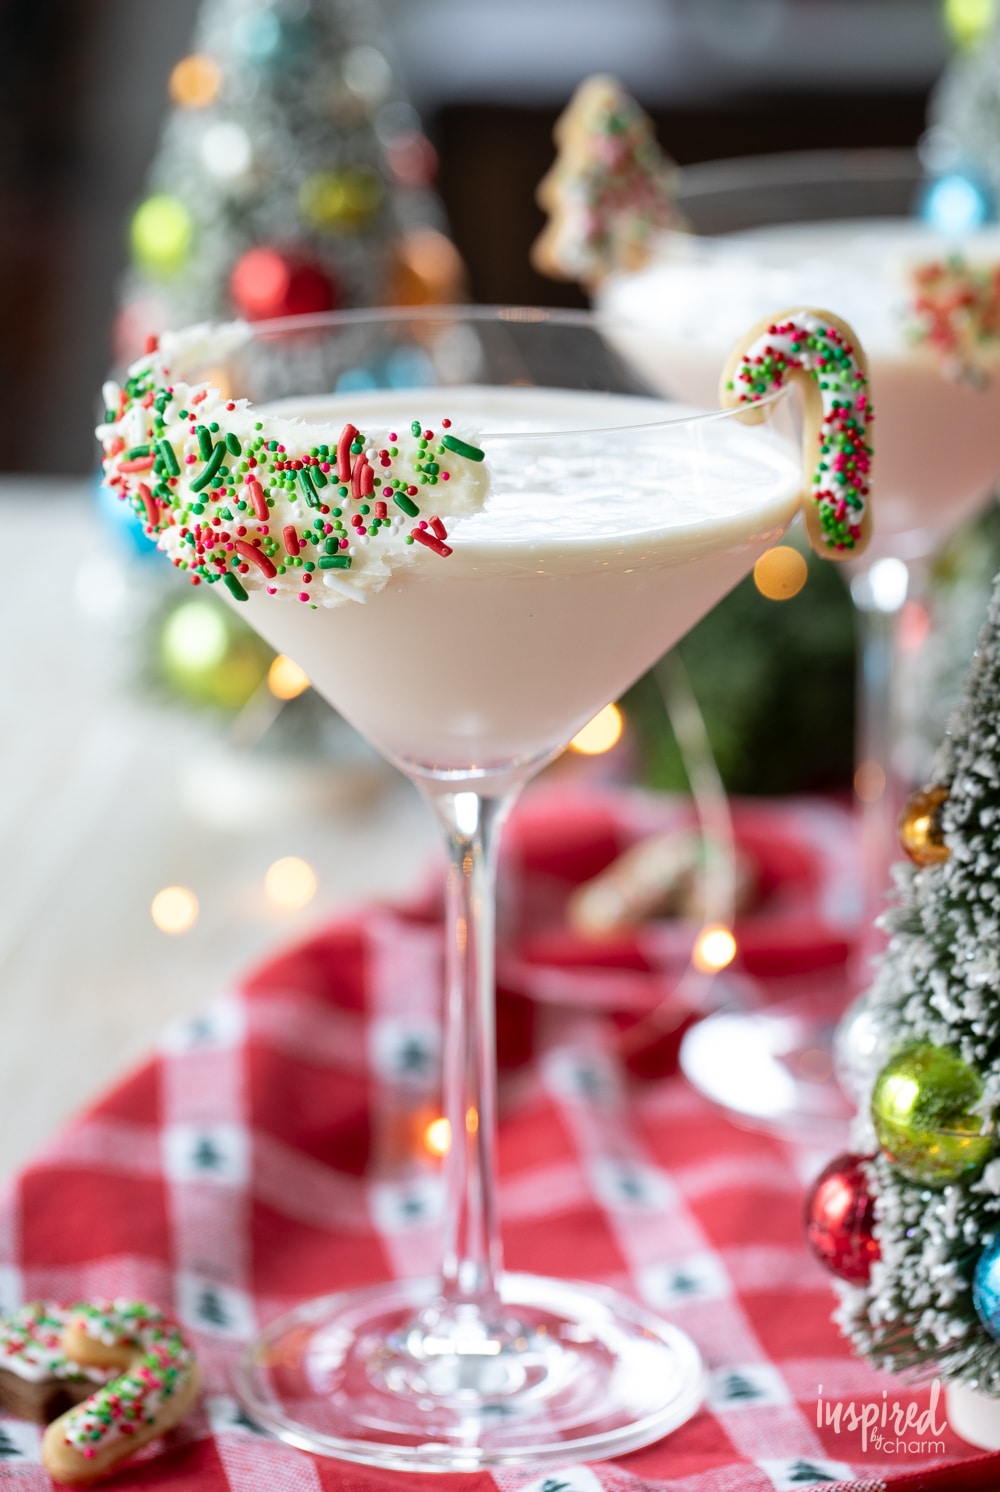 sugar cookie martini for Christmas in a festive glass.